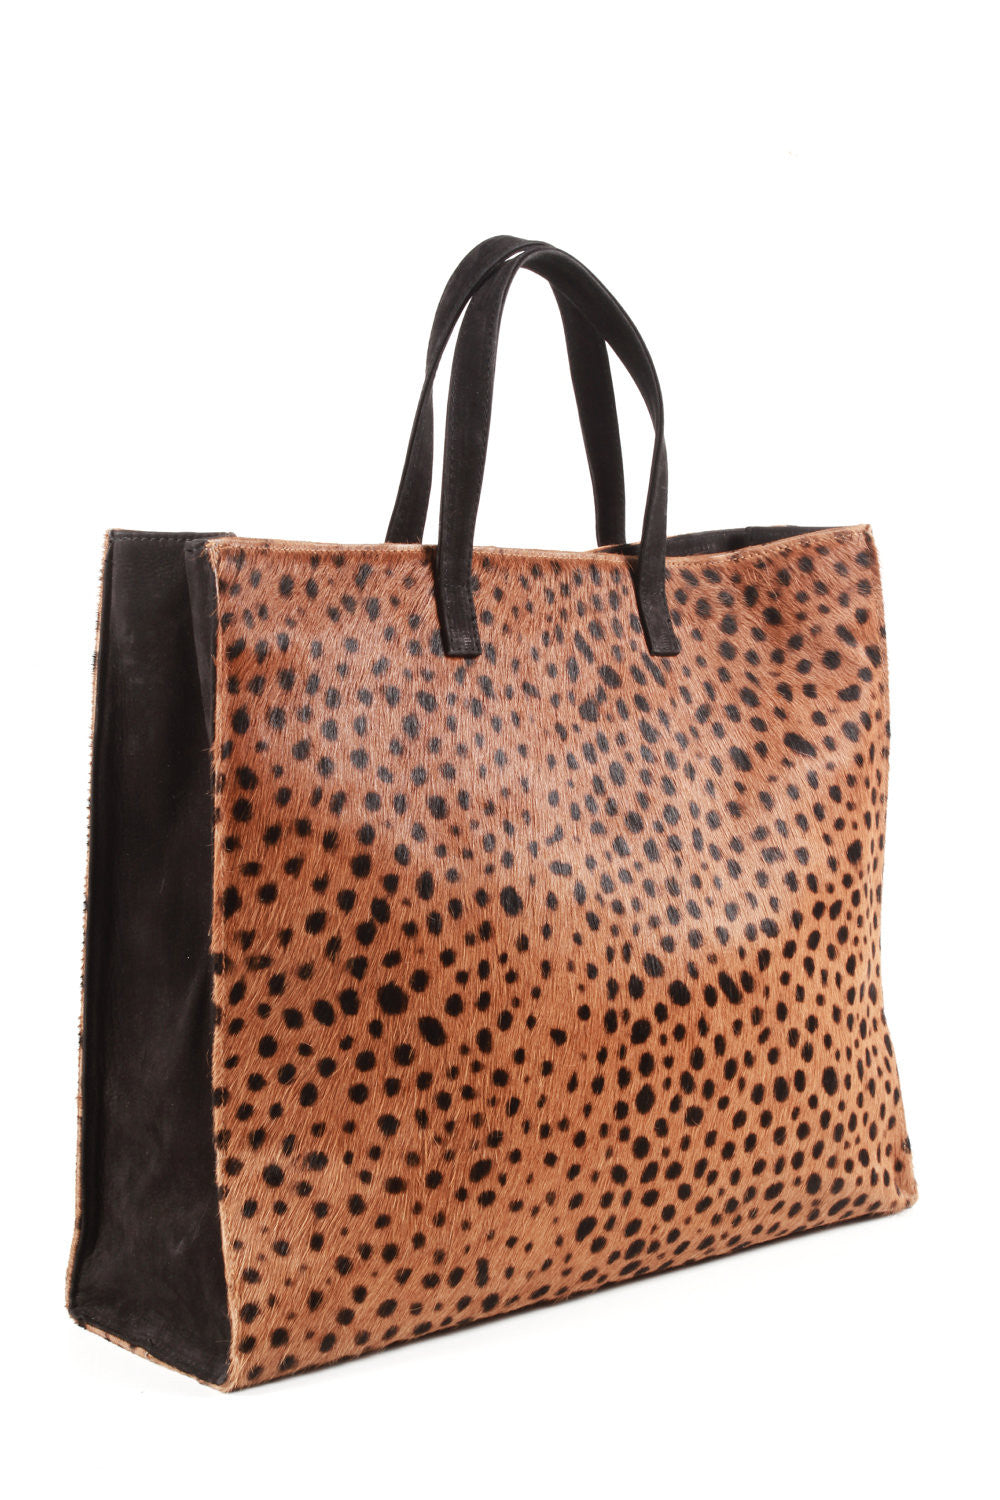 Clare V. Leopard Tote Bags for Women